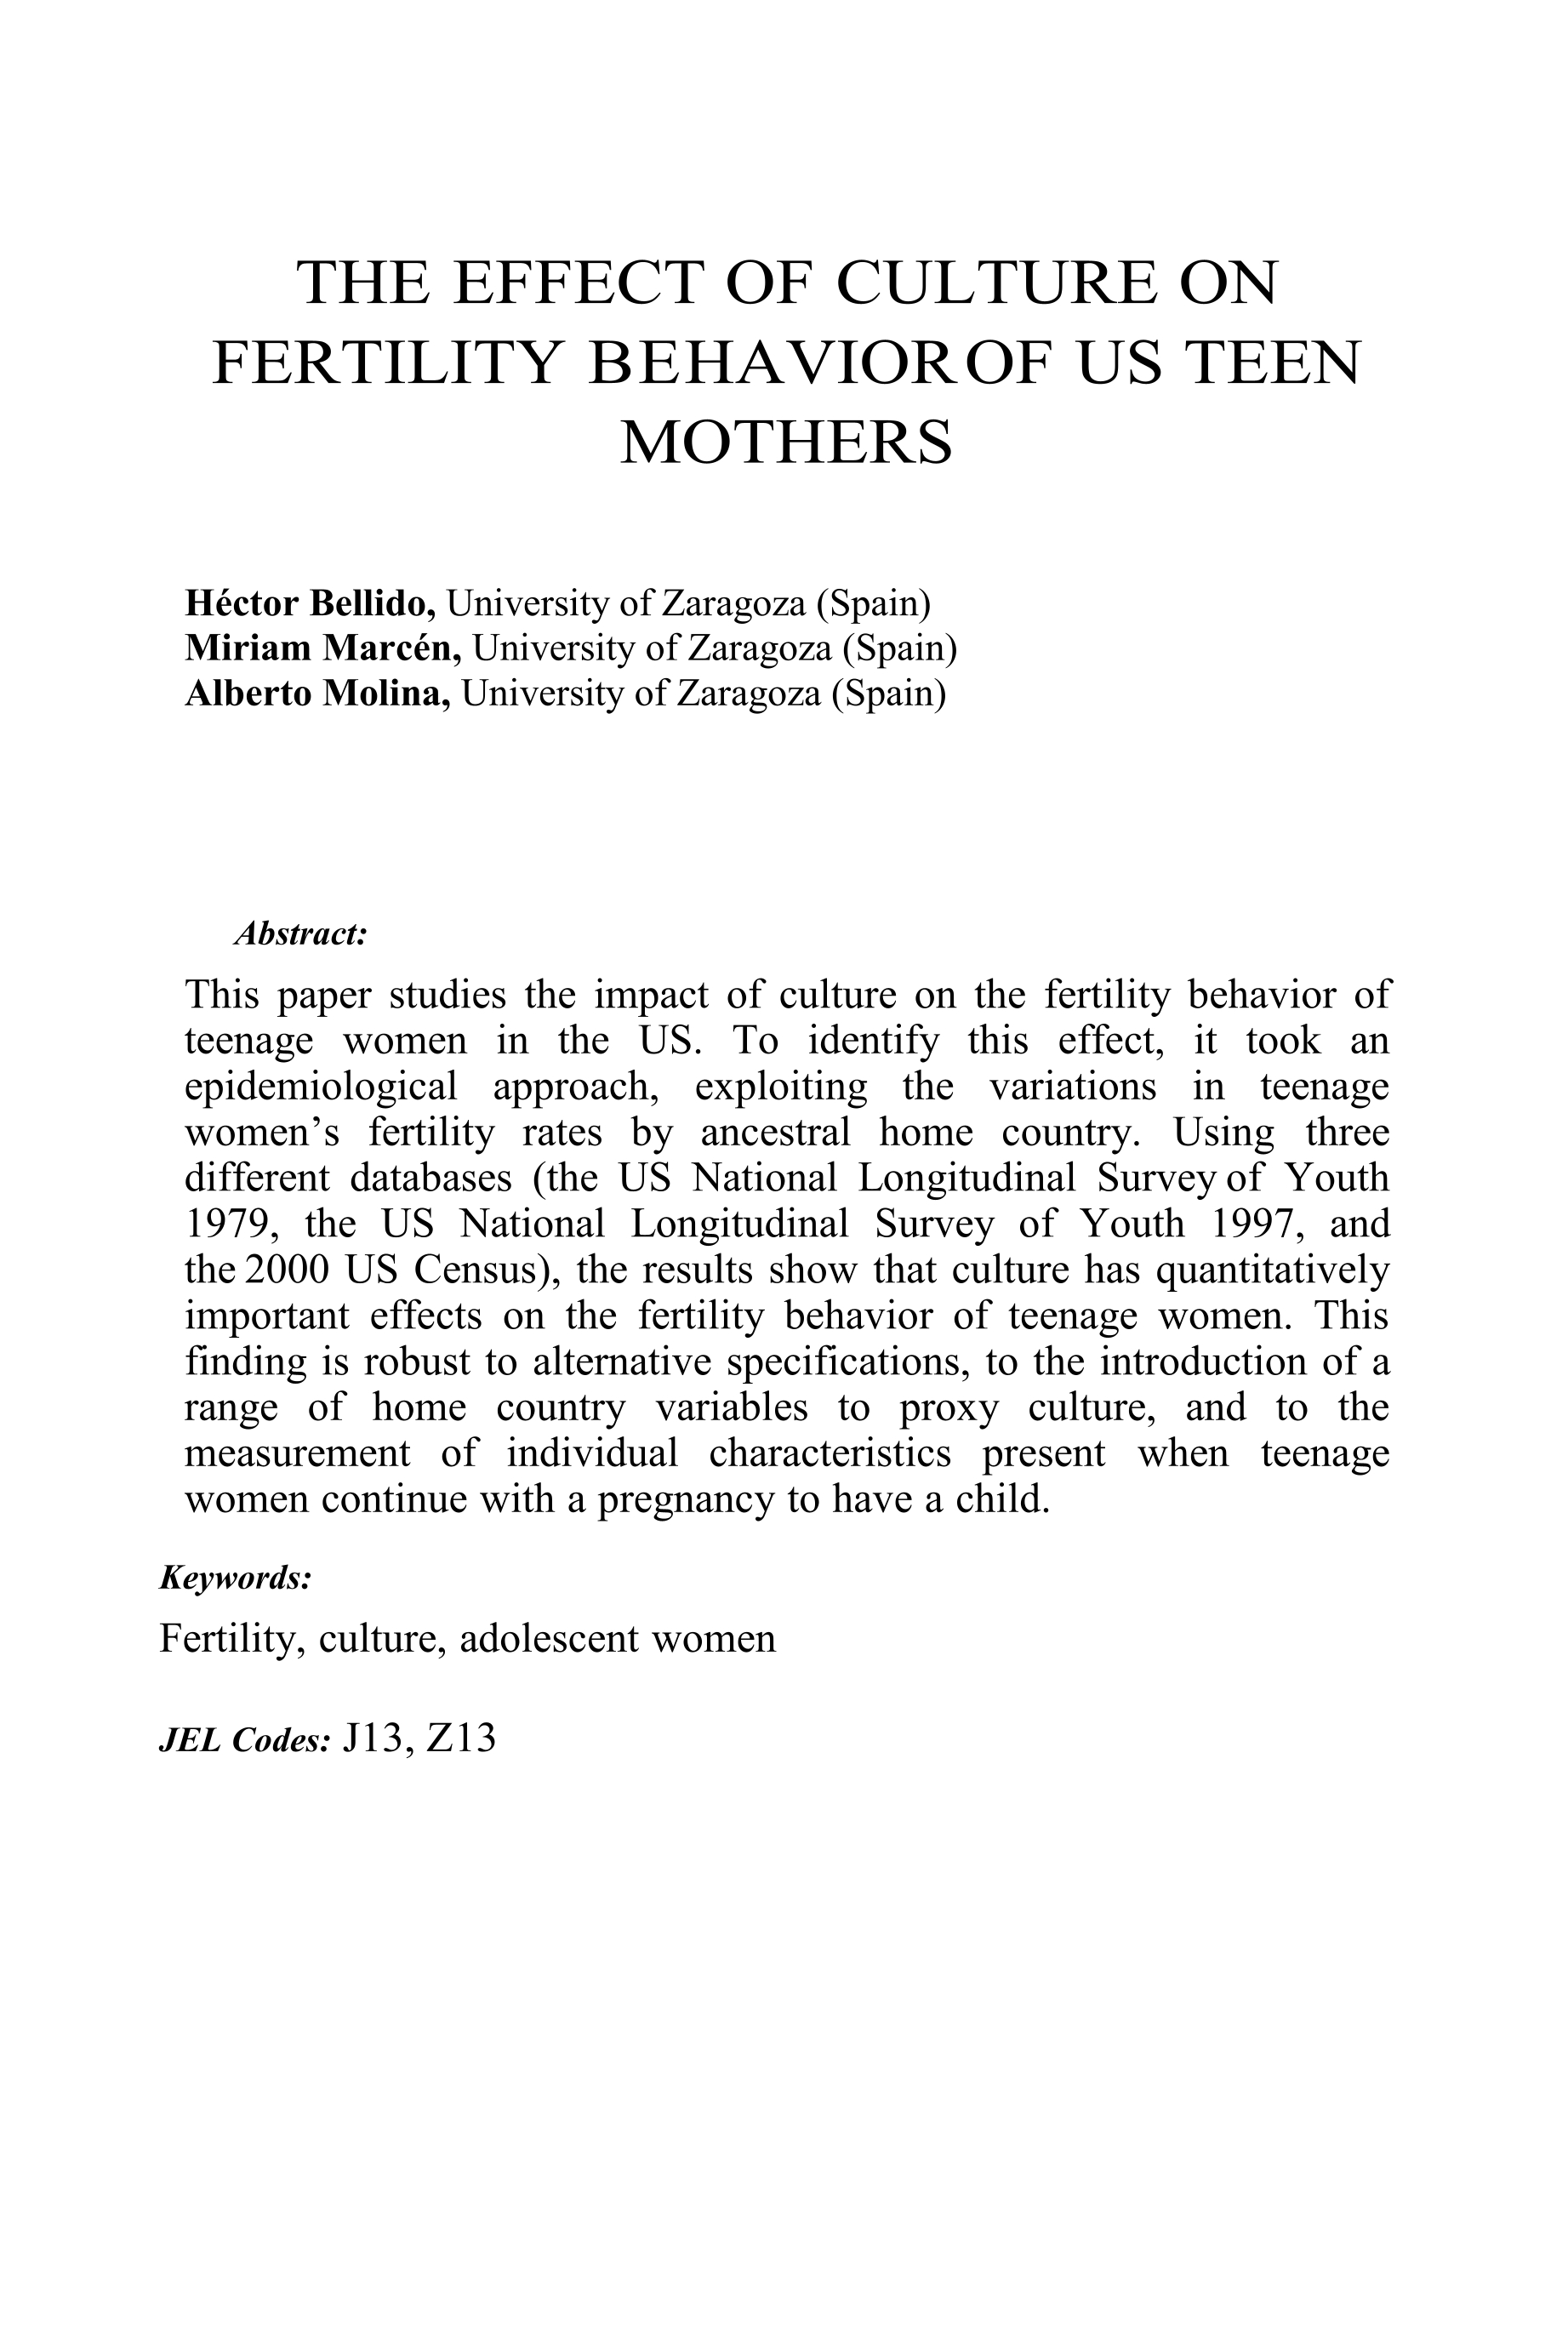 The effect of culture on fertility behavior of US teen mothers